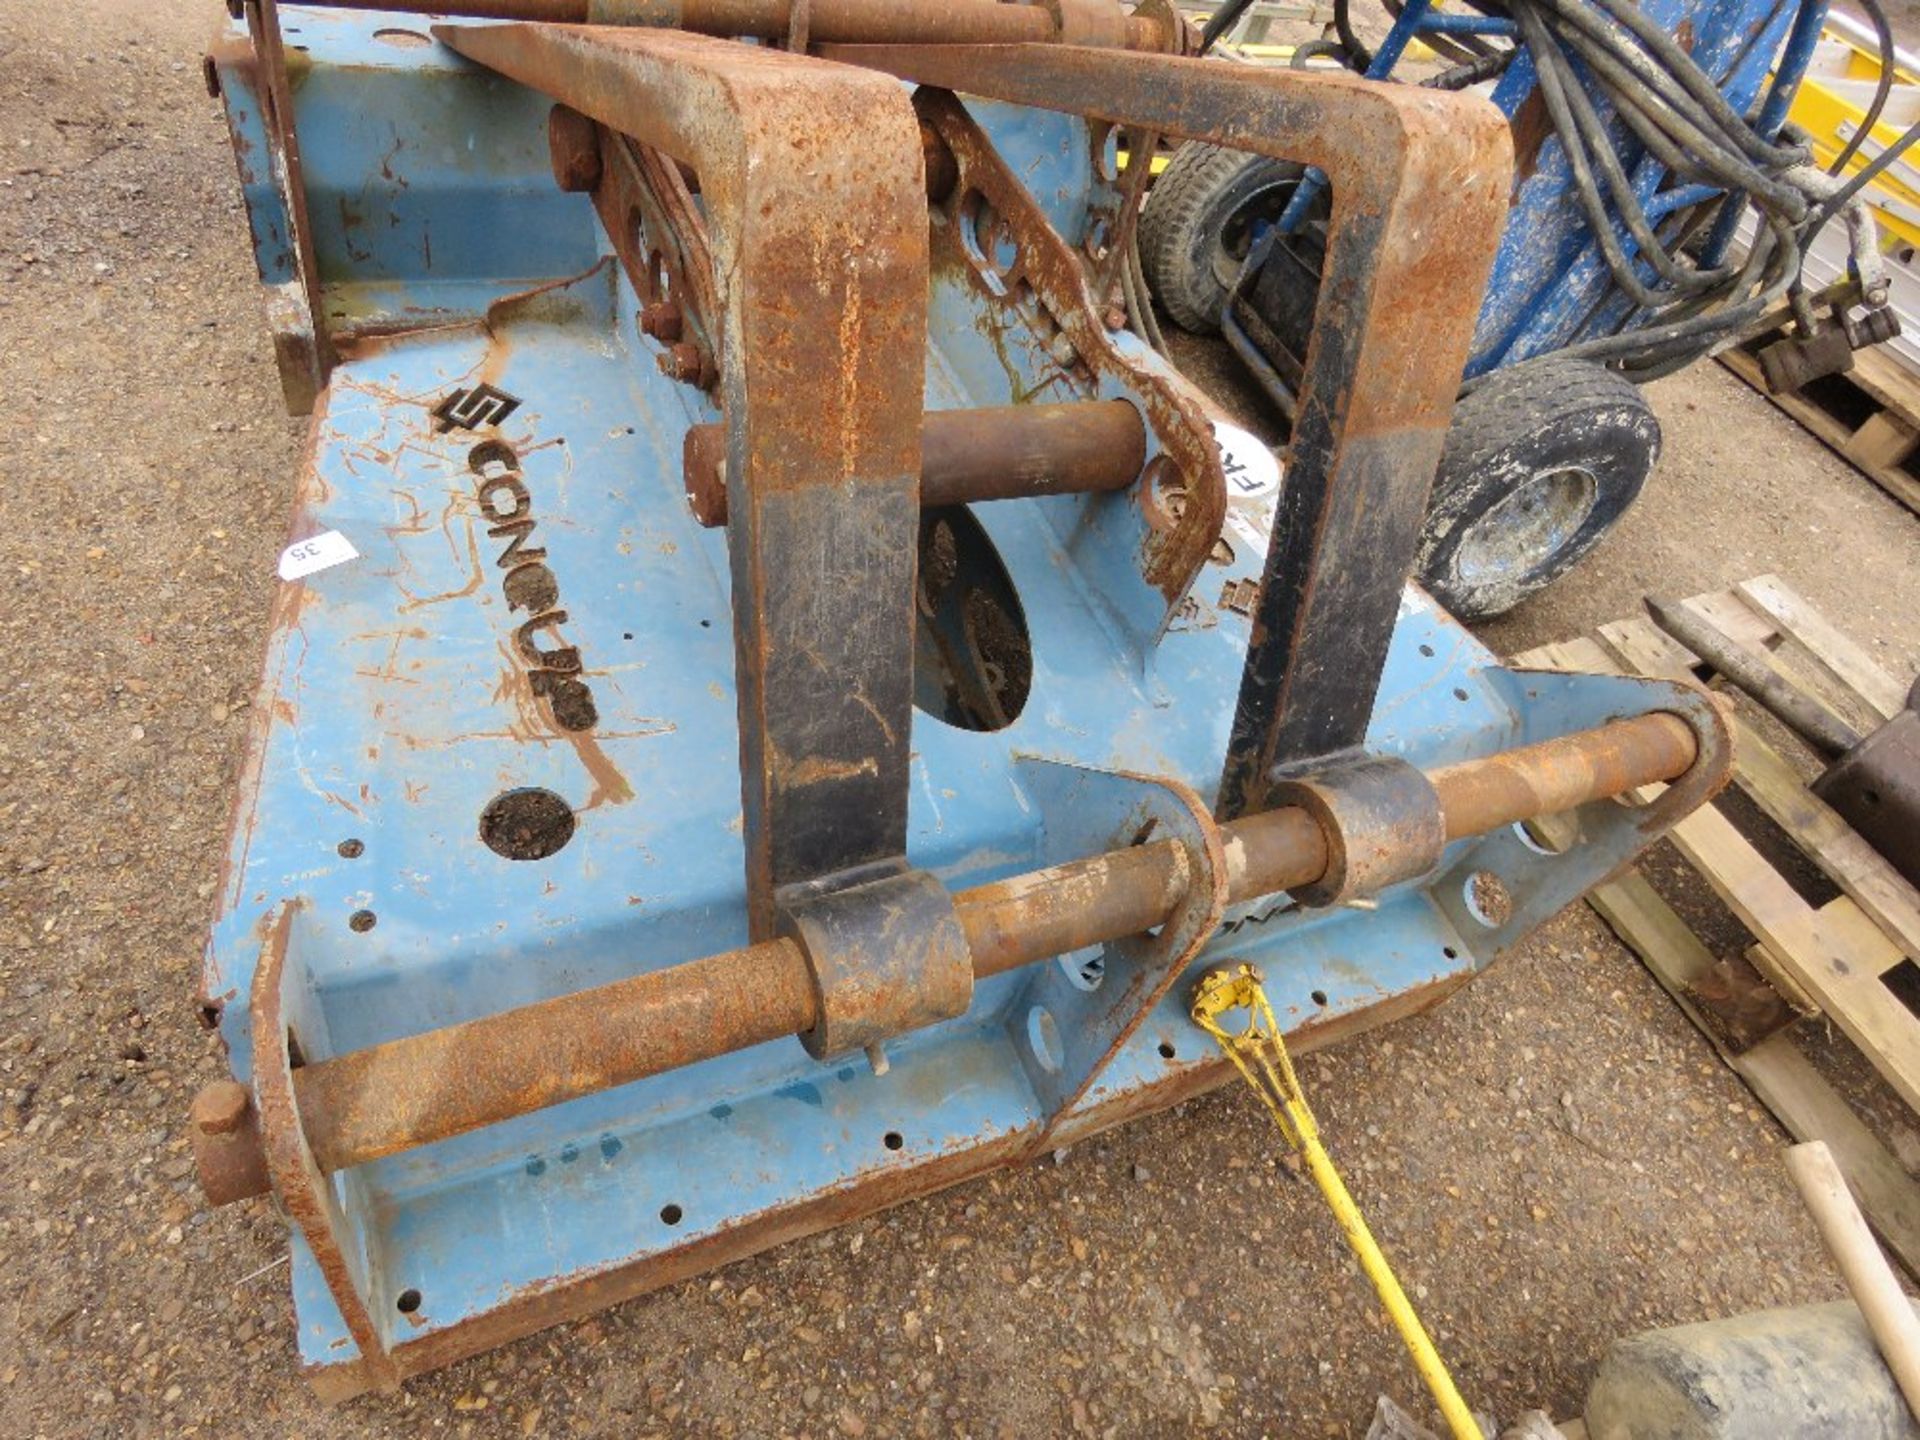 SET OF CONQUIP EXCAVATOR MOUNTED PALLET FORKS. SOURCED FROM COMPANY LIQUIDATION. - Image 2 of 5